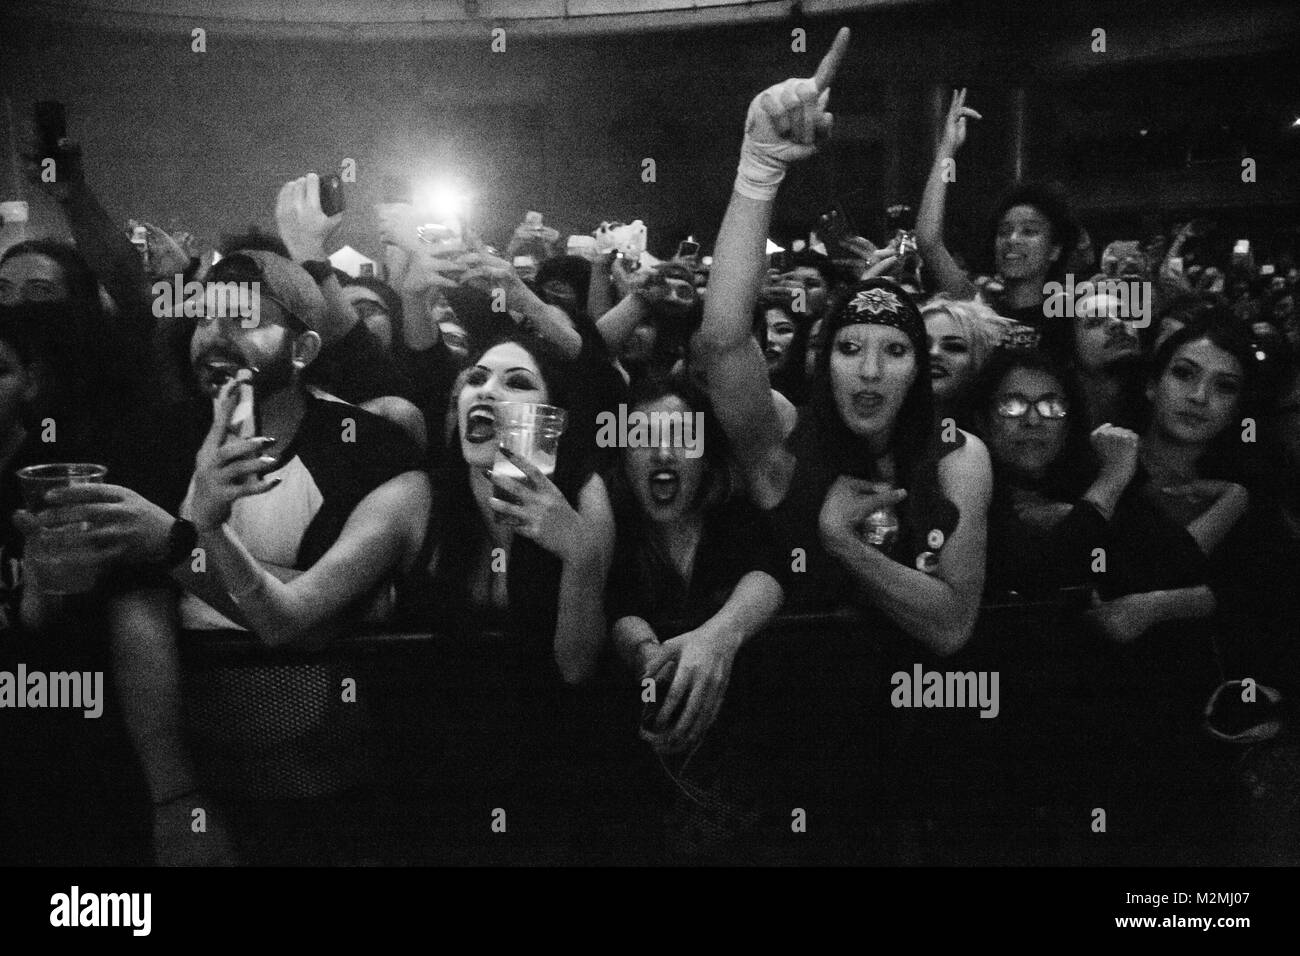 Fans in the front row at the Marilyn Manson show. Stock Photo